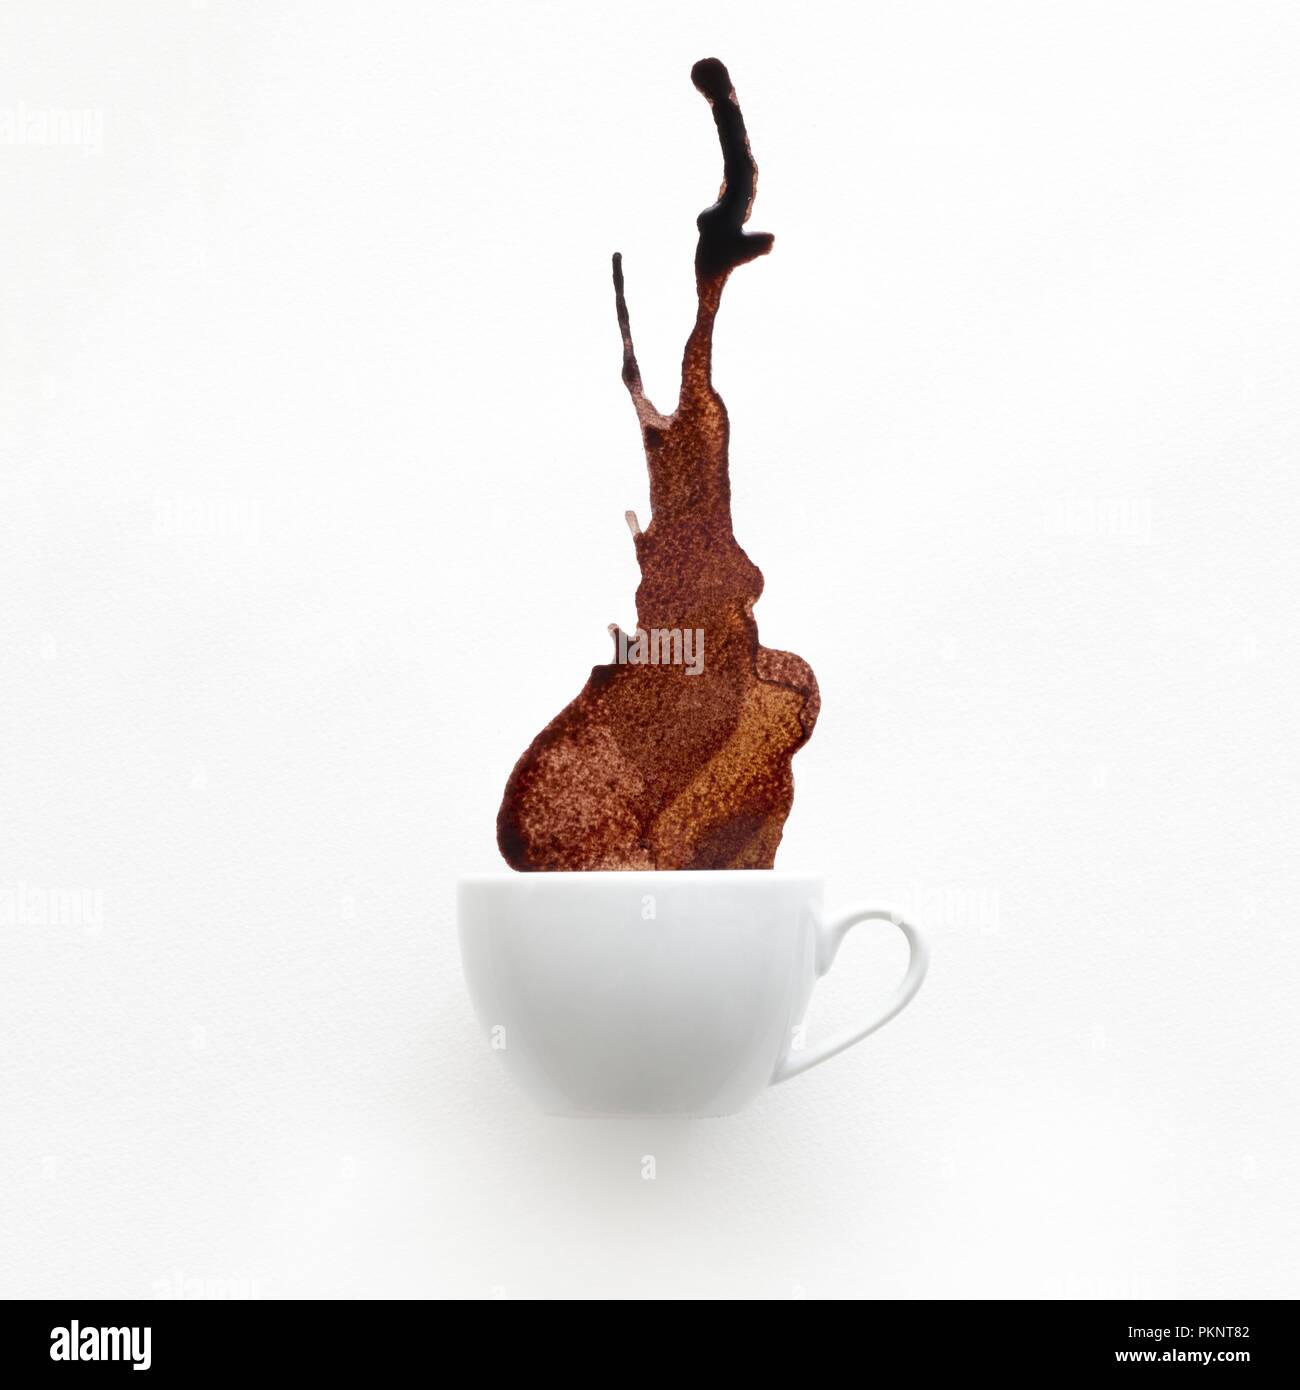 Cup of coffee spilling against a white background. Stock Photo